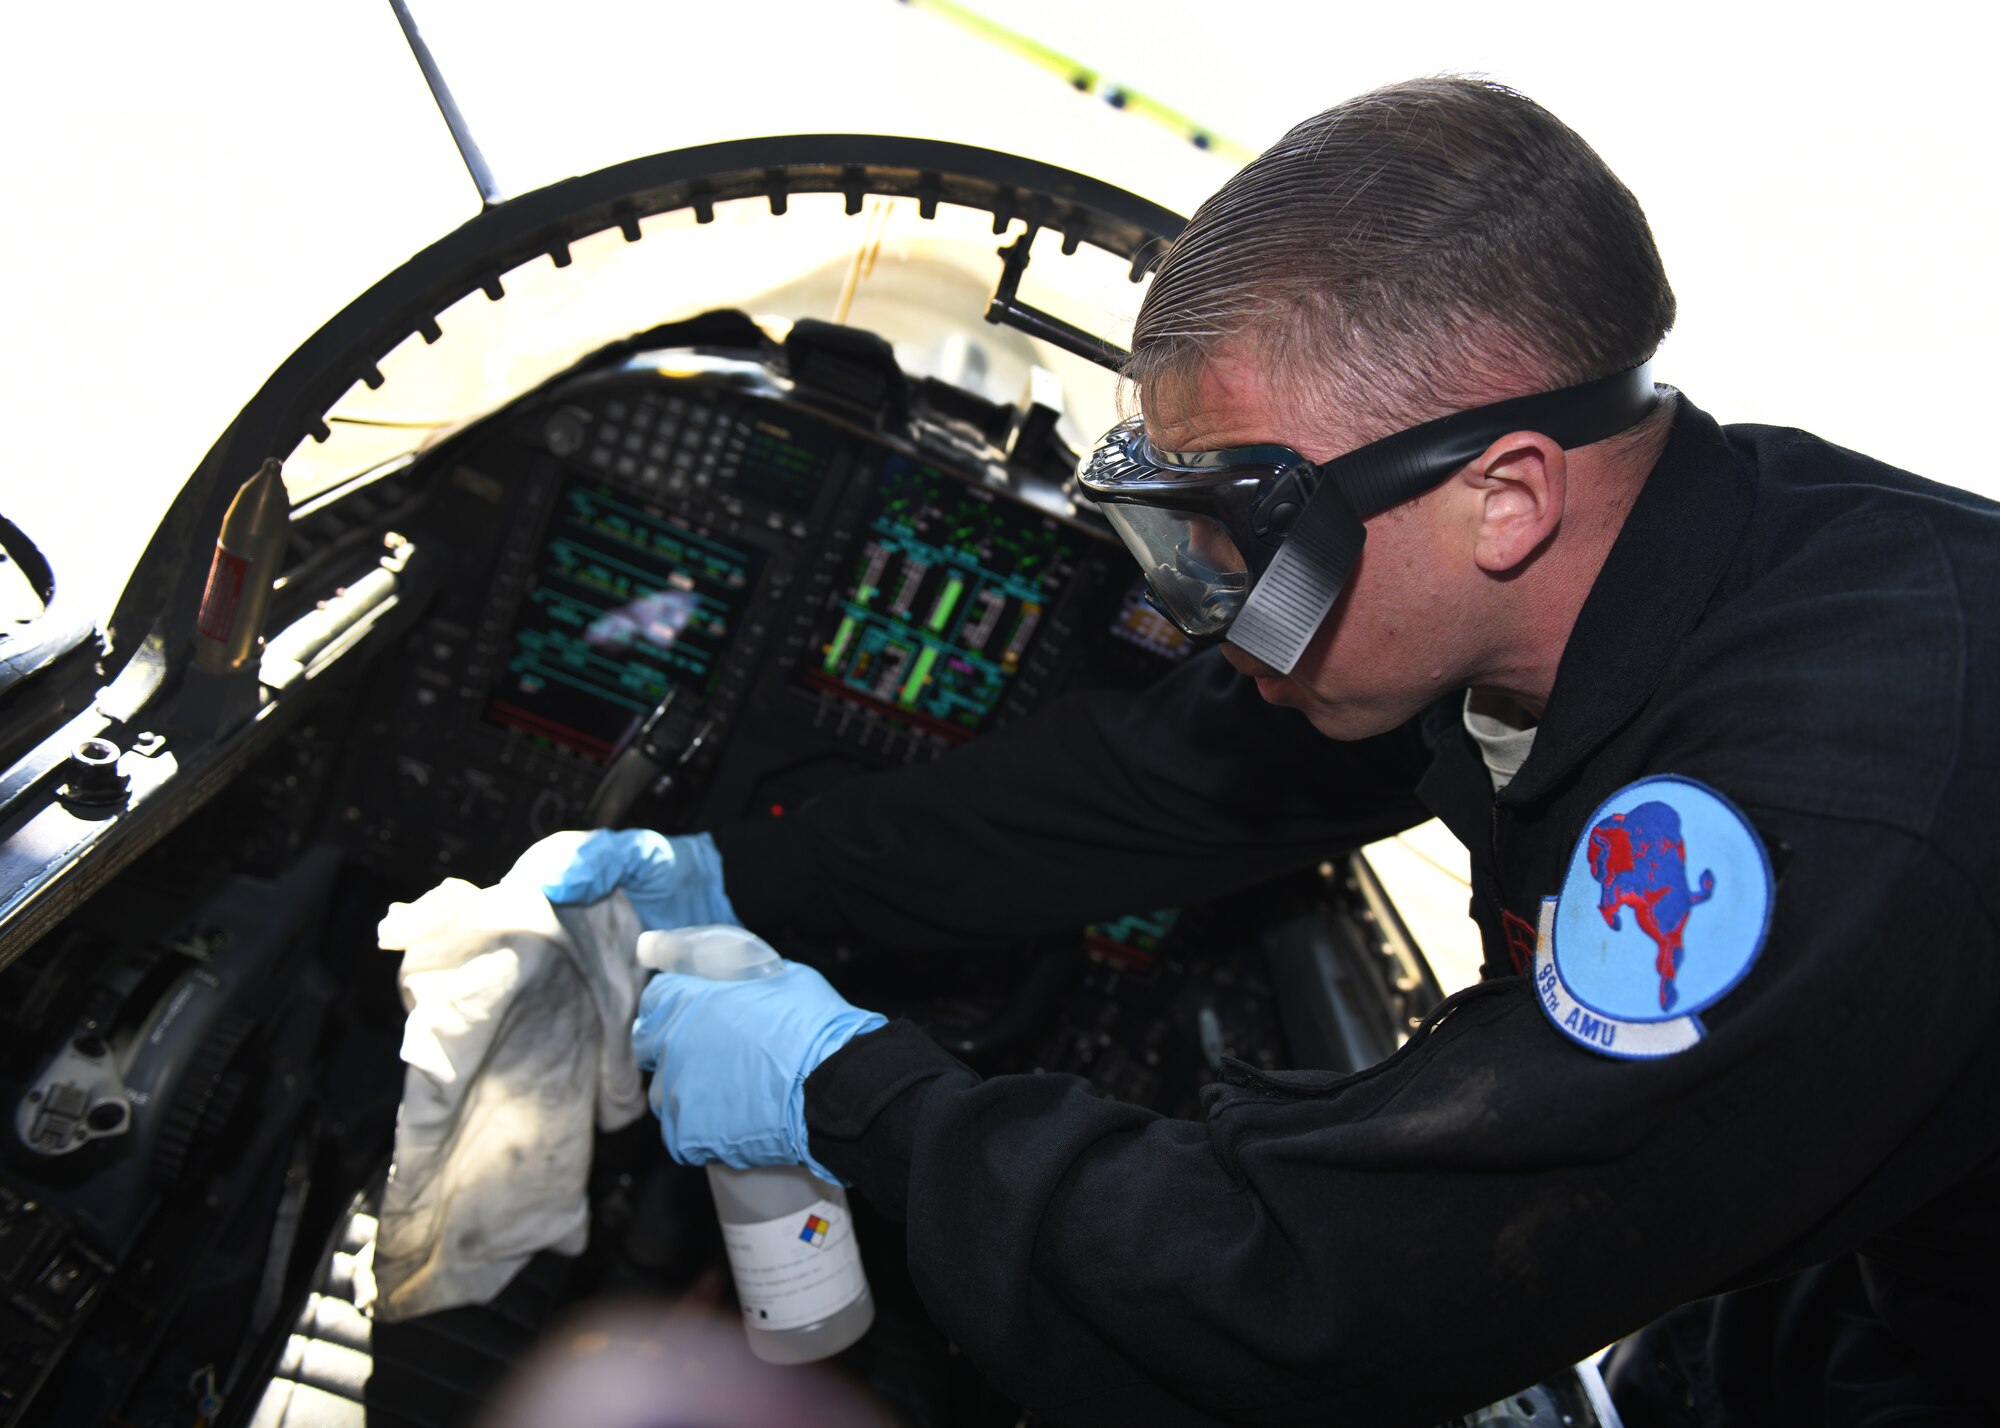 Staff Sgt. Brandon Green, 99th Aircraft Maintenance Unit dedicated crew chief, sprays disinfectant liquid on a rag to sanitize a U-2 Dragon Lady’s cockpit Mar. 23, 2020 at Beale Air Force Base, California. The cockpits on Beale’s fleet of U-2s will be sanitized on a regular basis to prevent the spread of COVID-19. (U.S. Air Force photo by Airman 1st Class Luis A. Ruiz-Vazquez)